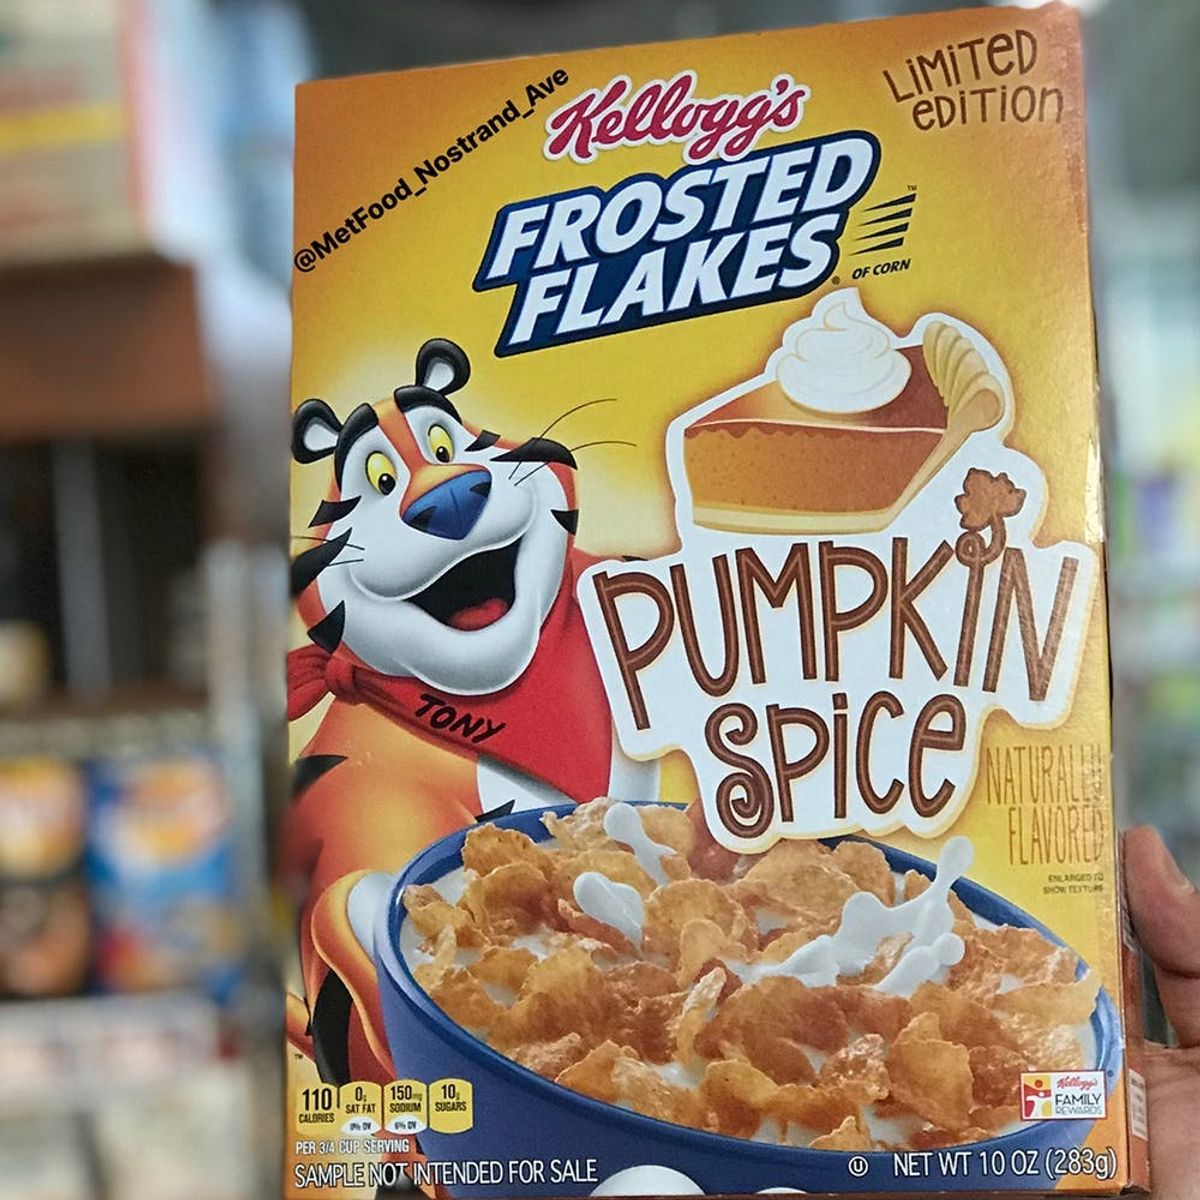 Pumpkin Spice Season Kicks Off Extra Early This Year Thanks to Frosted Flakes